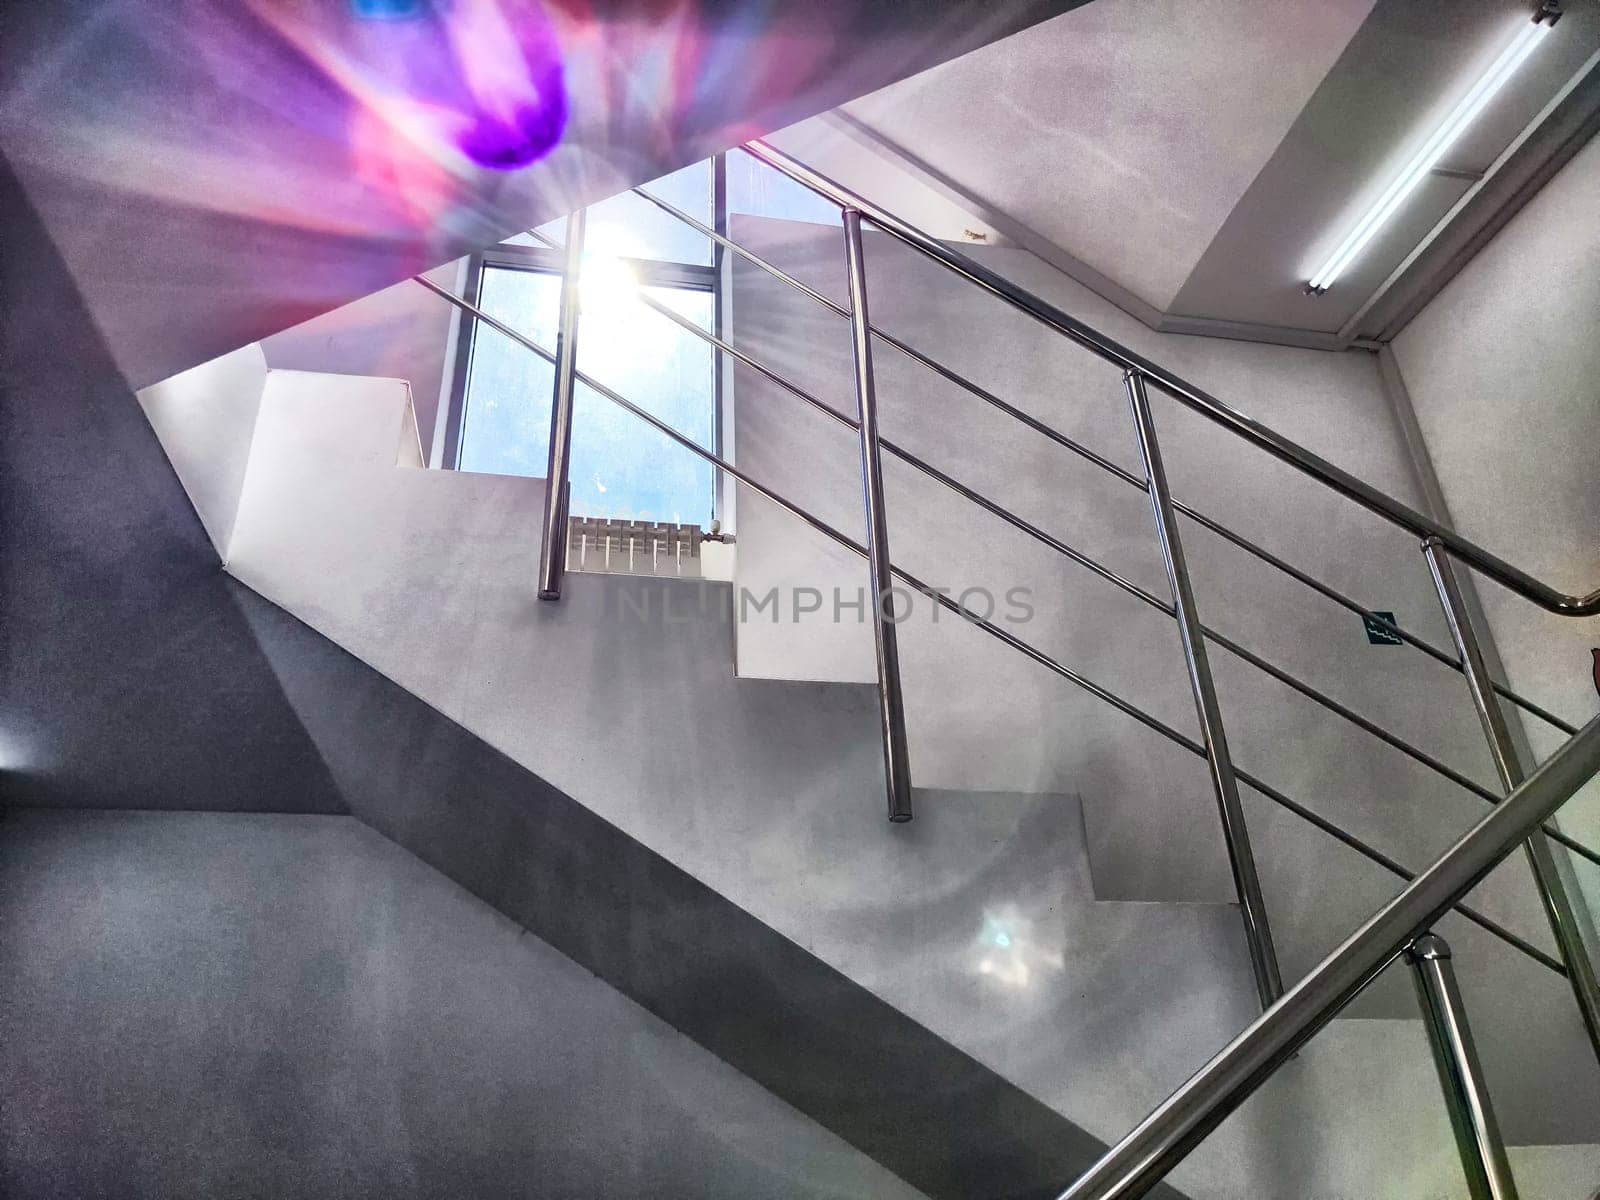 A bright staircase with metal railings and sunlight streaming through a window, creating sun flare